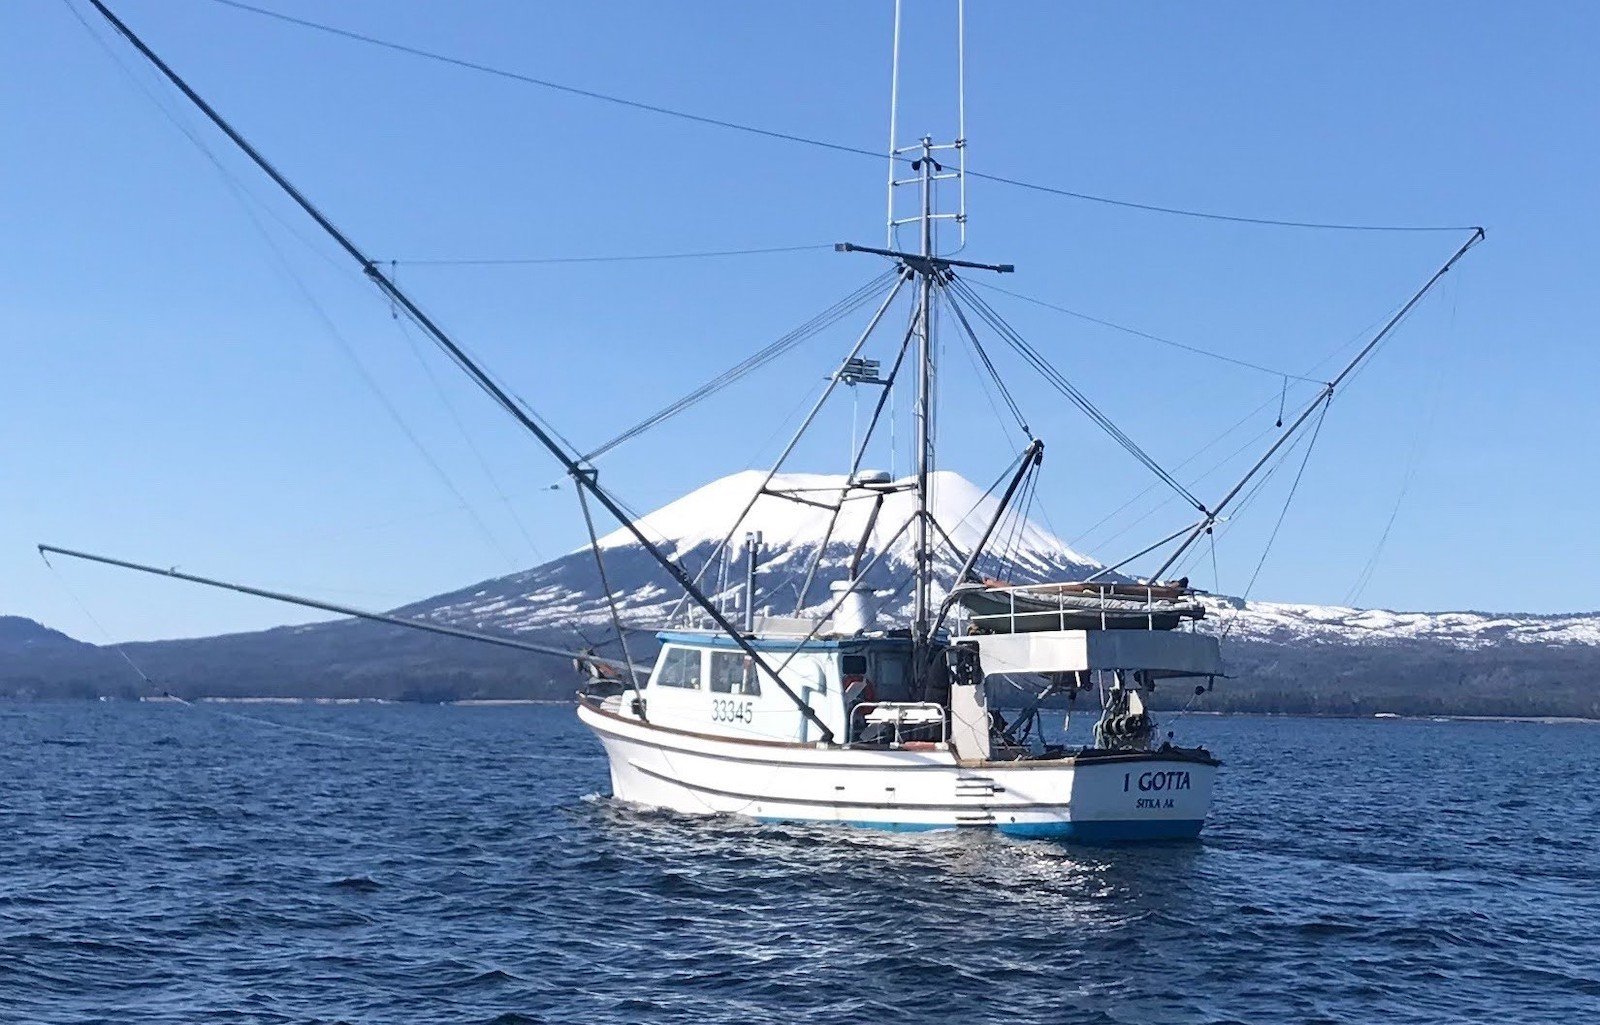 A fishing boat with the name 'I Gotta' painted on its stern trolls the waters with a snow-capped volcanic peak in the background.